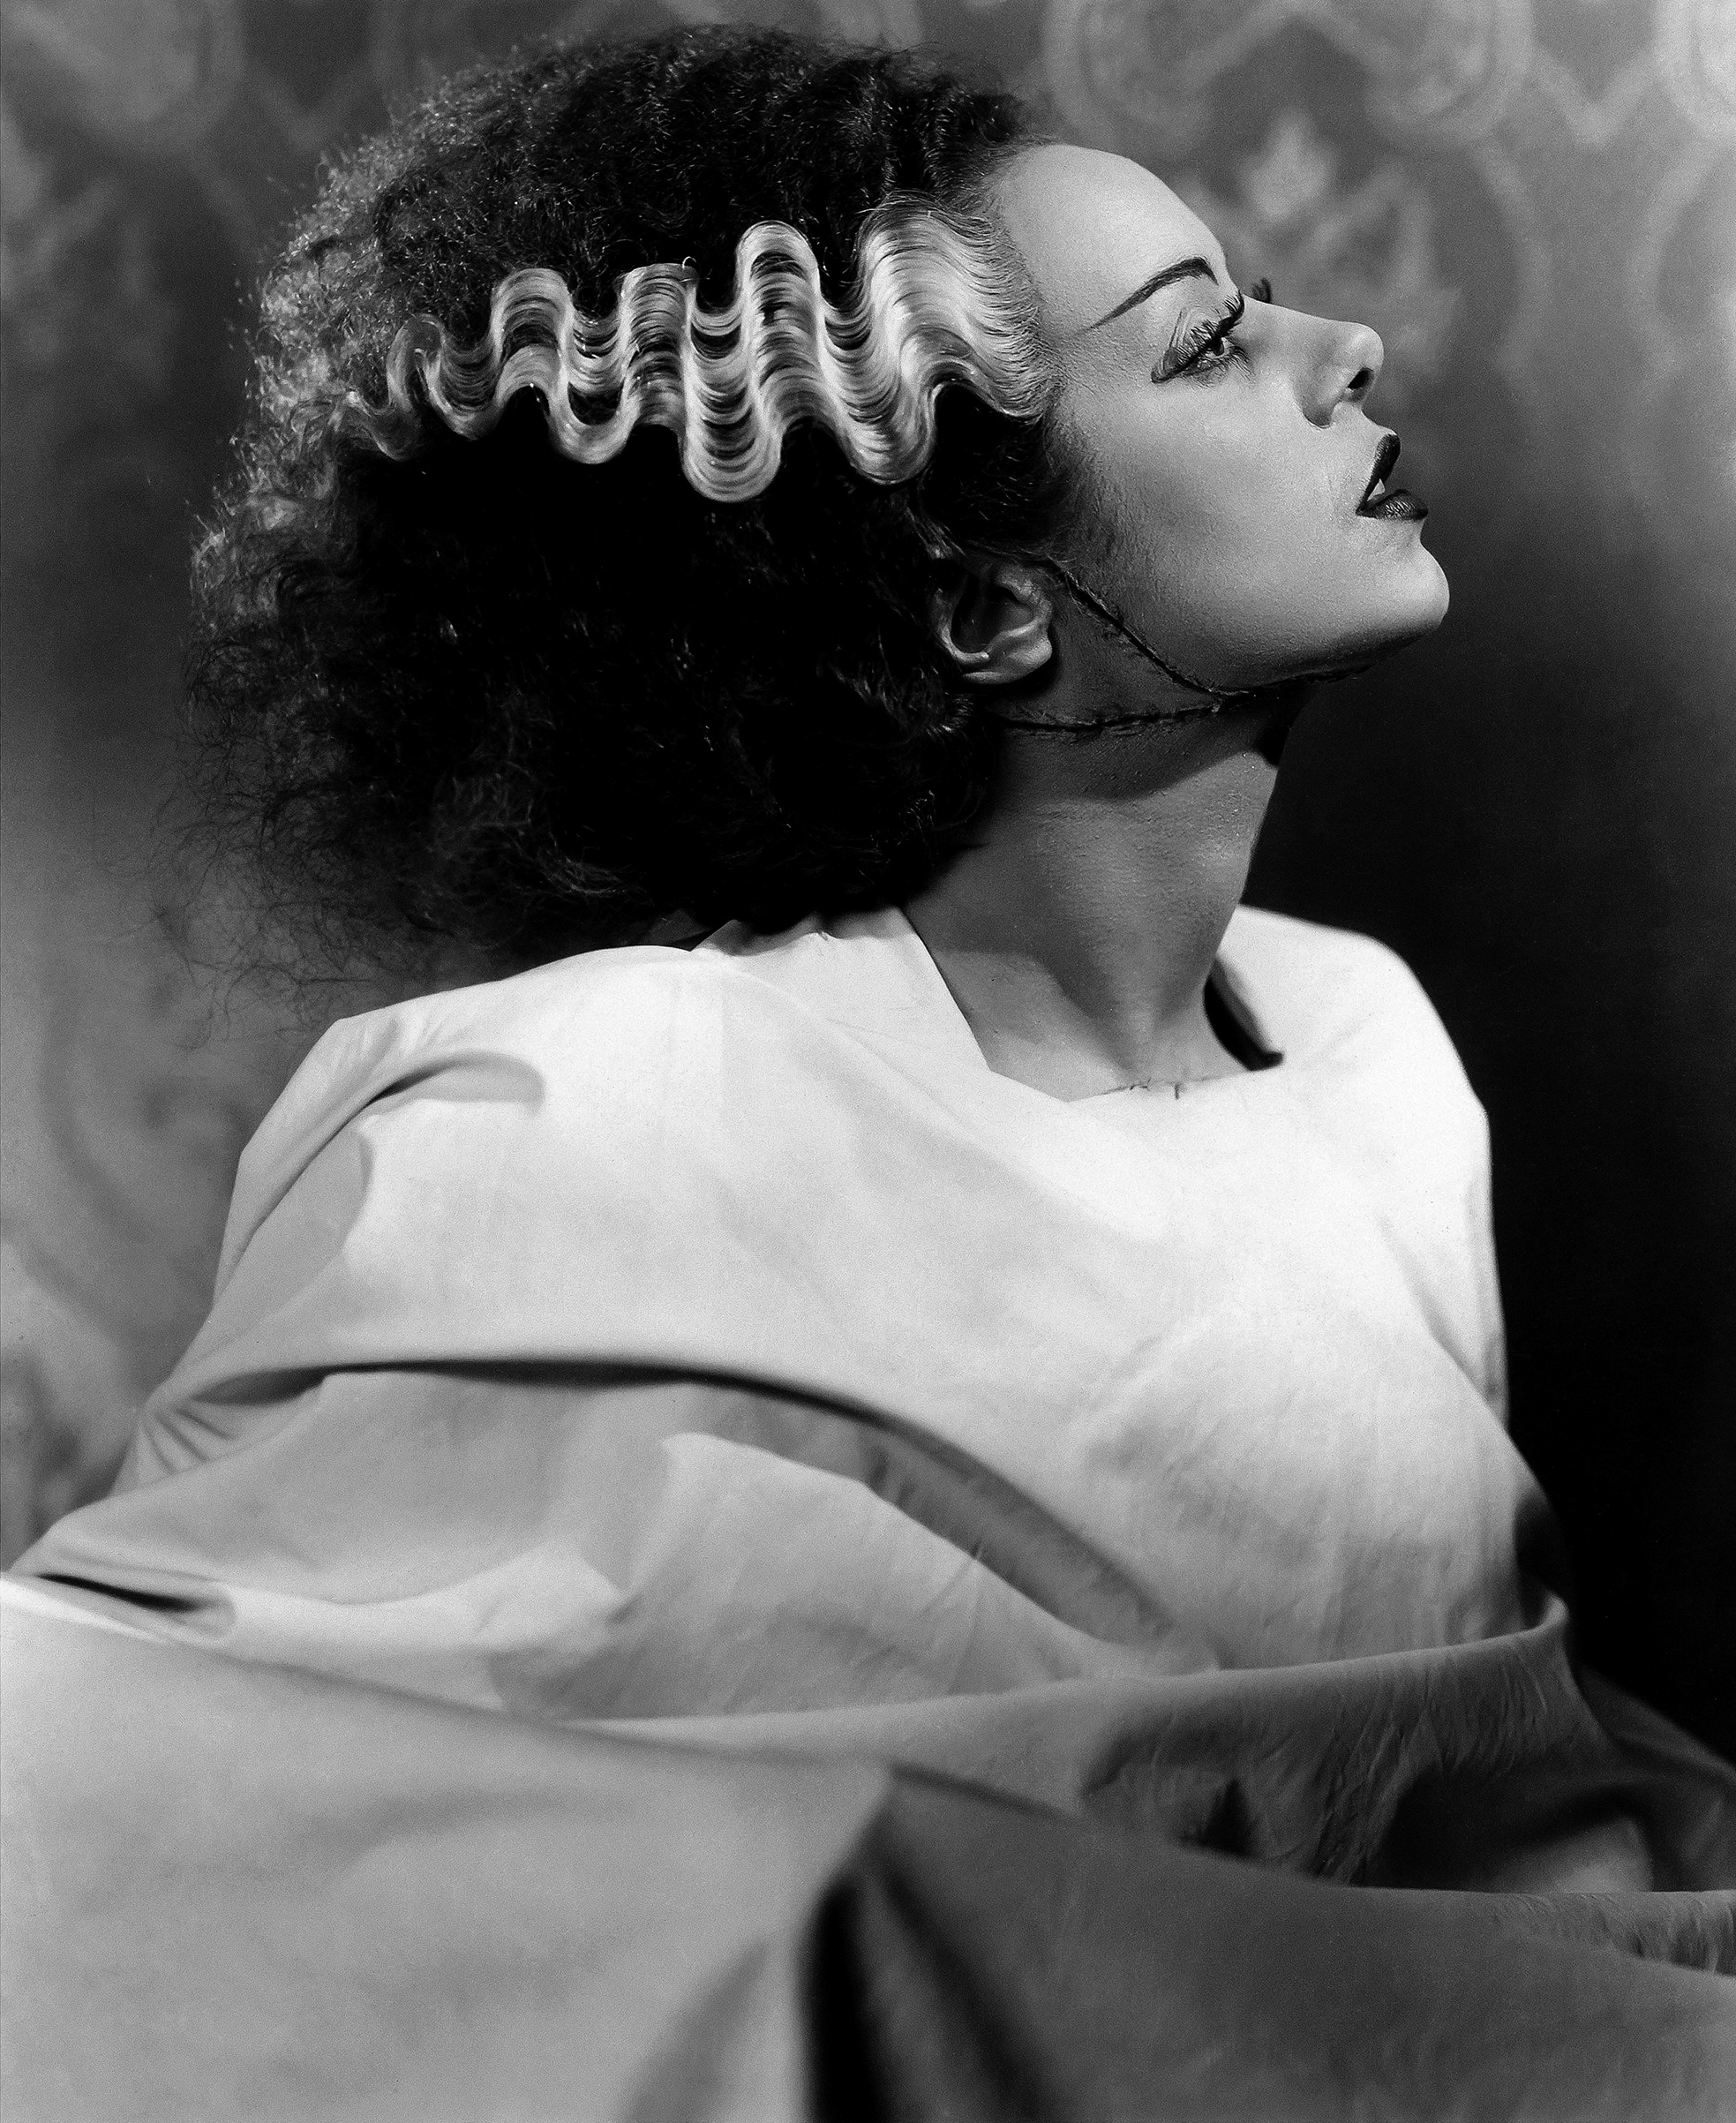 Jack Pierce’s makeup for Elsa Lanchester as the Bride, based on visual ideas supplied by James Whale and Ernest Thesiger.